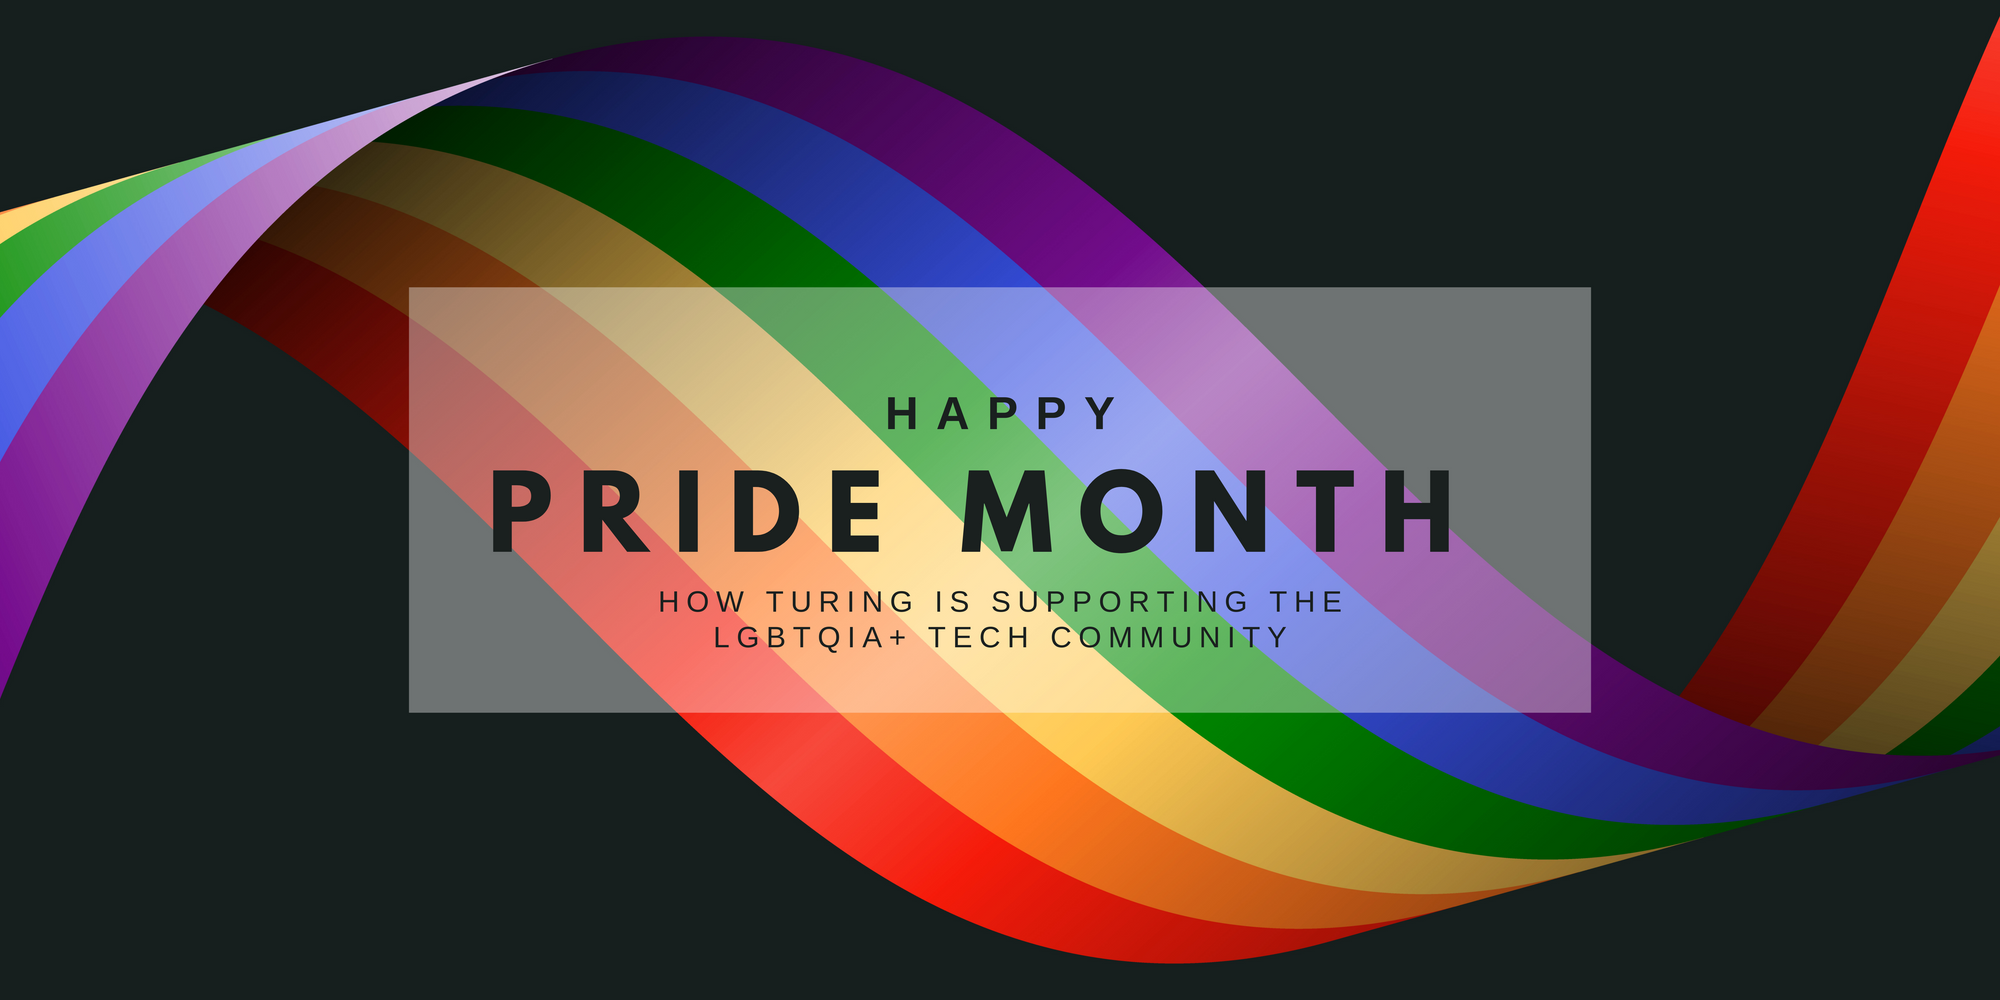 How Turing is Supporting the LGBTQIA+ Tech Community